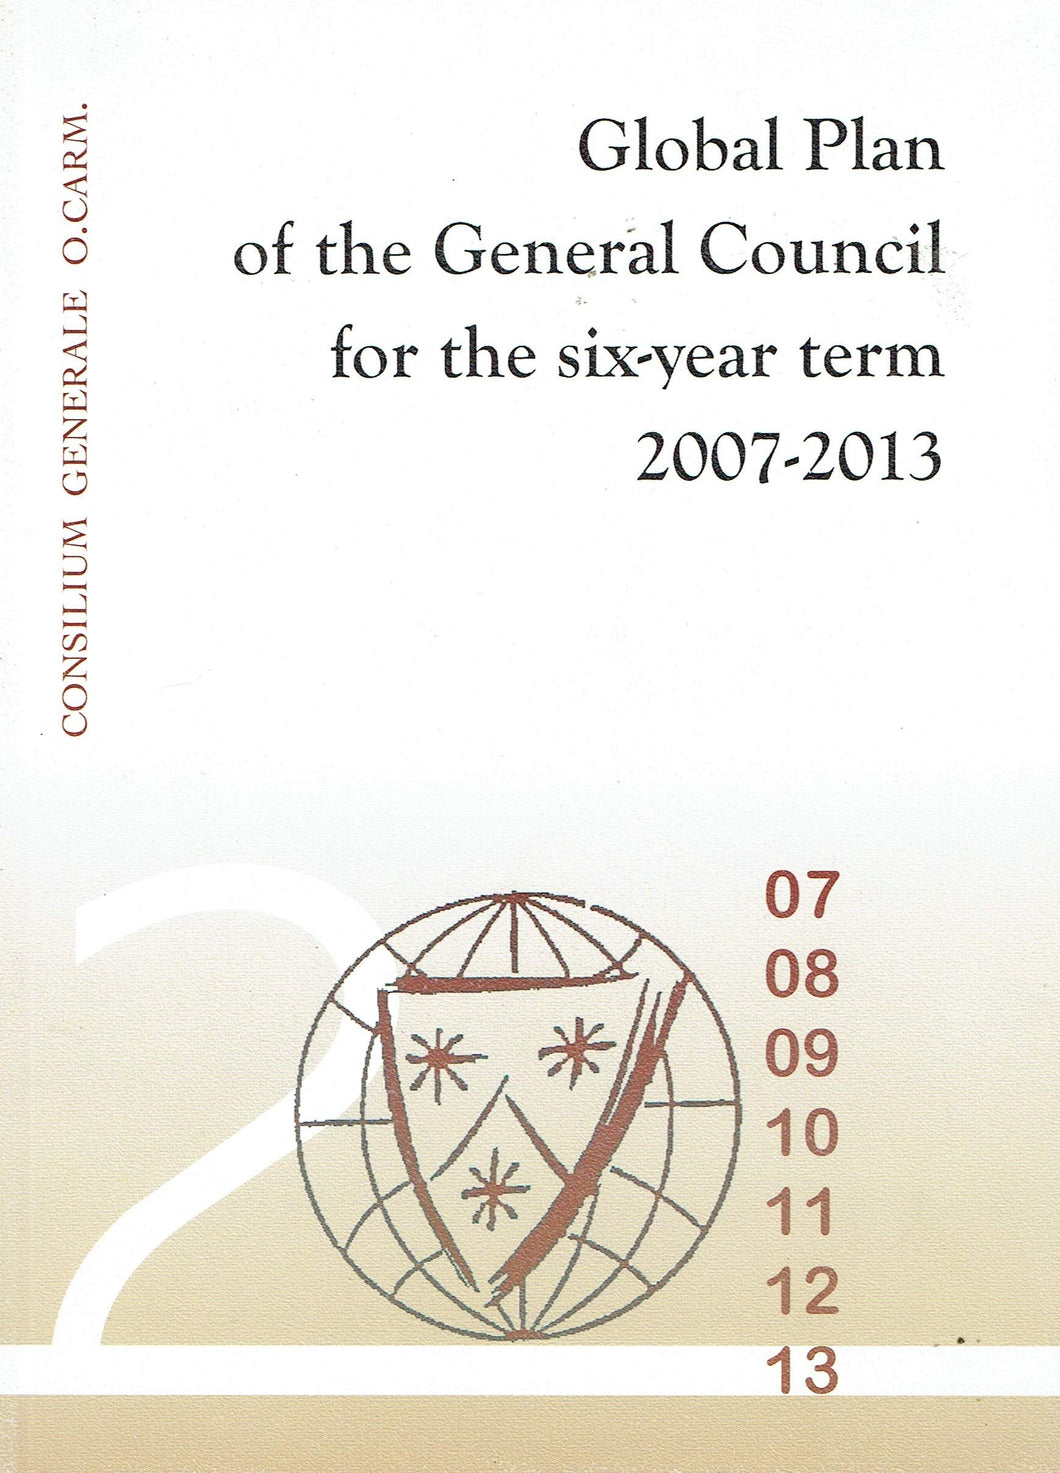 Global Plan of the General Council for the Six-year Term 2007-2013